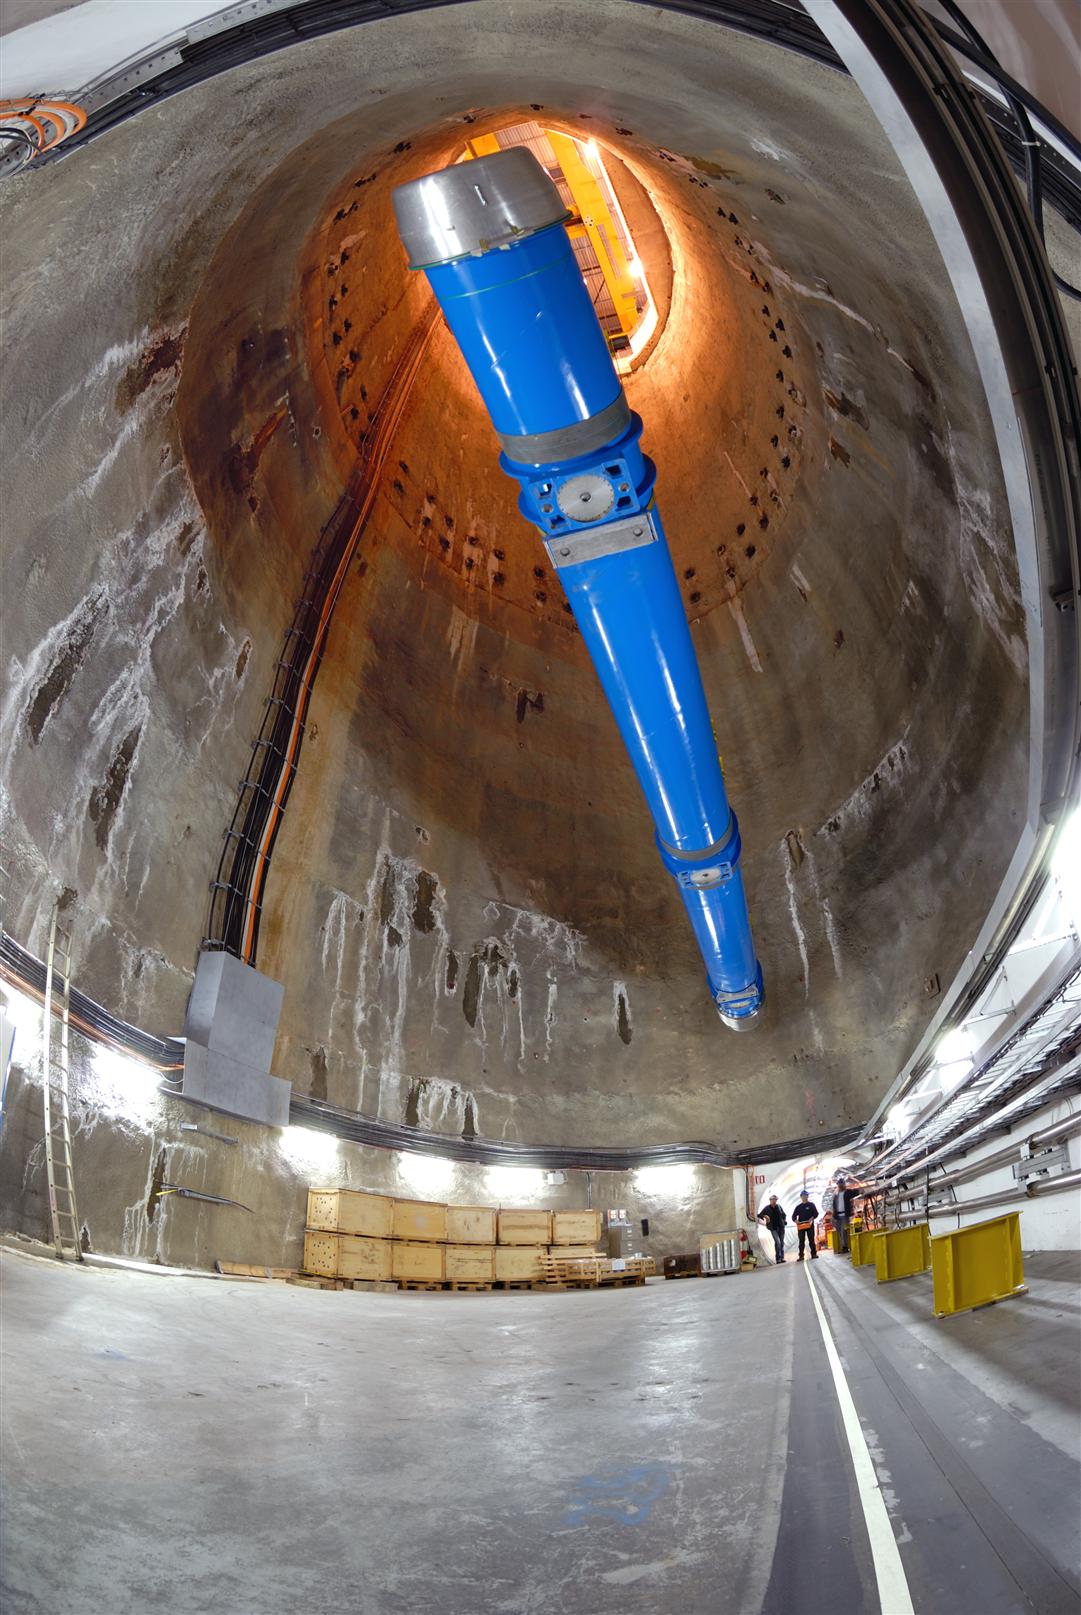 The last of 1746 superconducting magnets is lowered into the LHC tunnel via a specially constructed pit at 12:00 on 26 April. This 15-m long dipole magnet is one of 1232 dipoles positioned around the 27-km circumference of the collider. Dipole magnets produce a magnetic field that bends the particle beams around the circular accelerator.